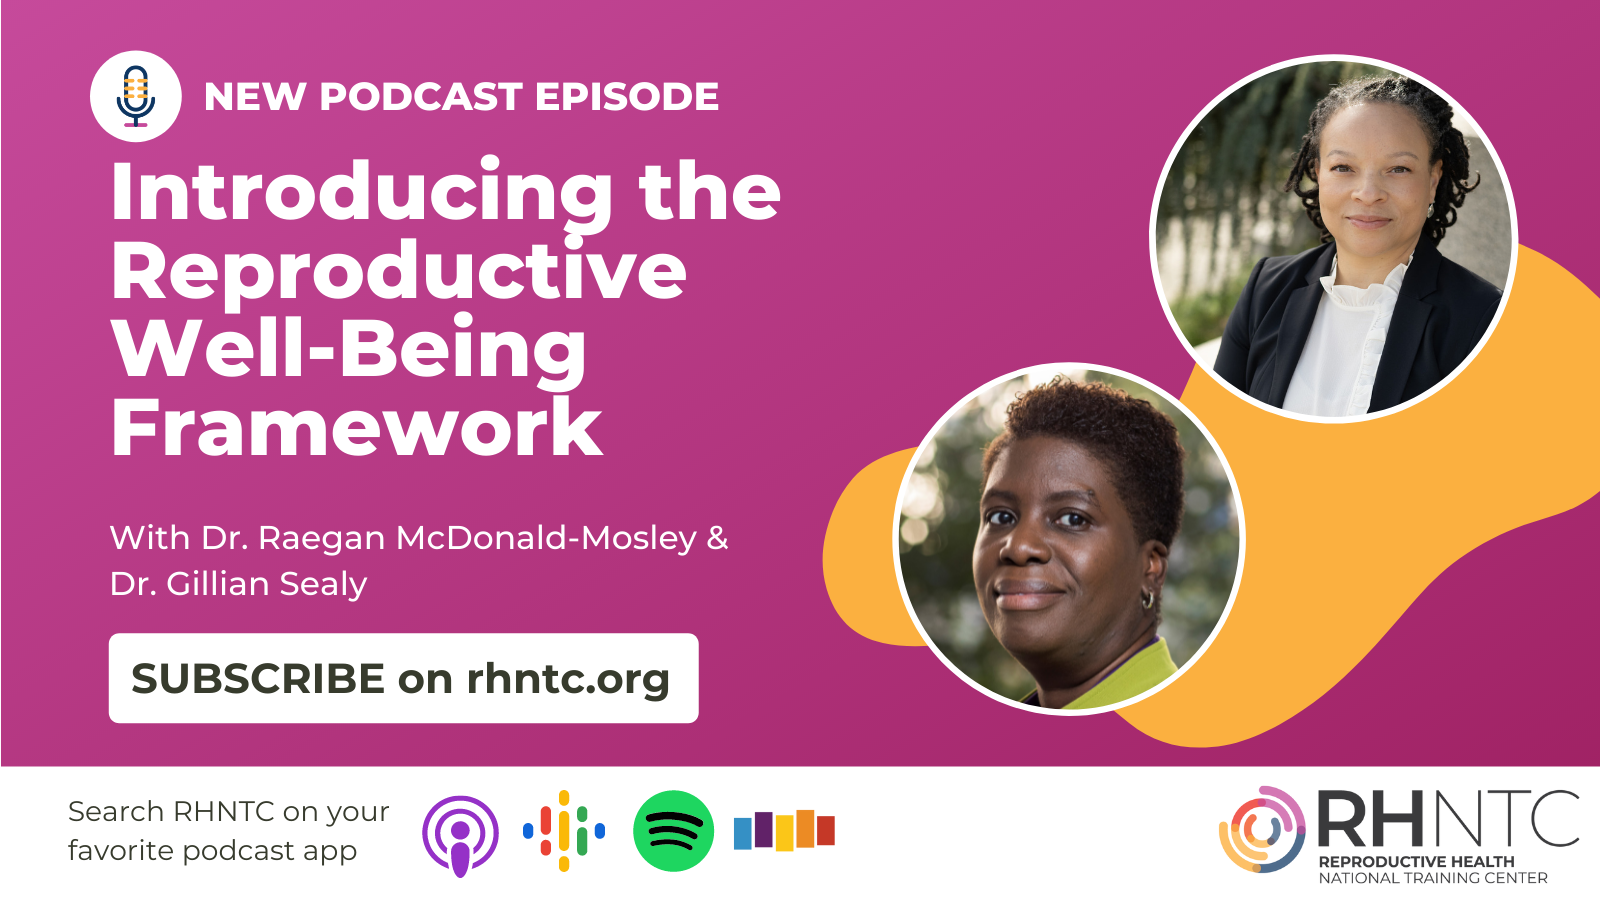 New podcast episodes: Introducing the Reproductive  Well-Being Framework With Dr. Raegan McDonald-Mosley & Dr. Gillian Sealy